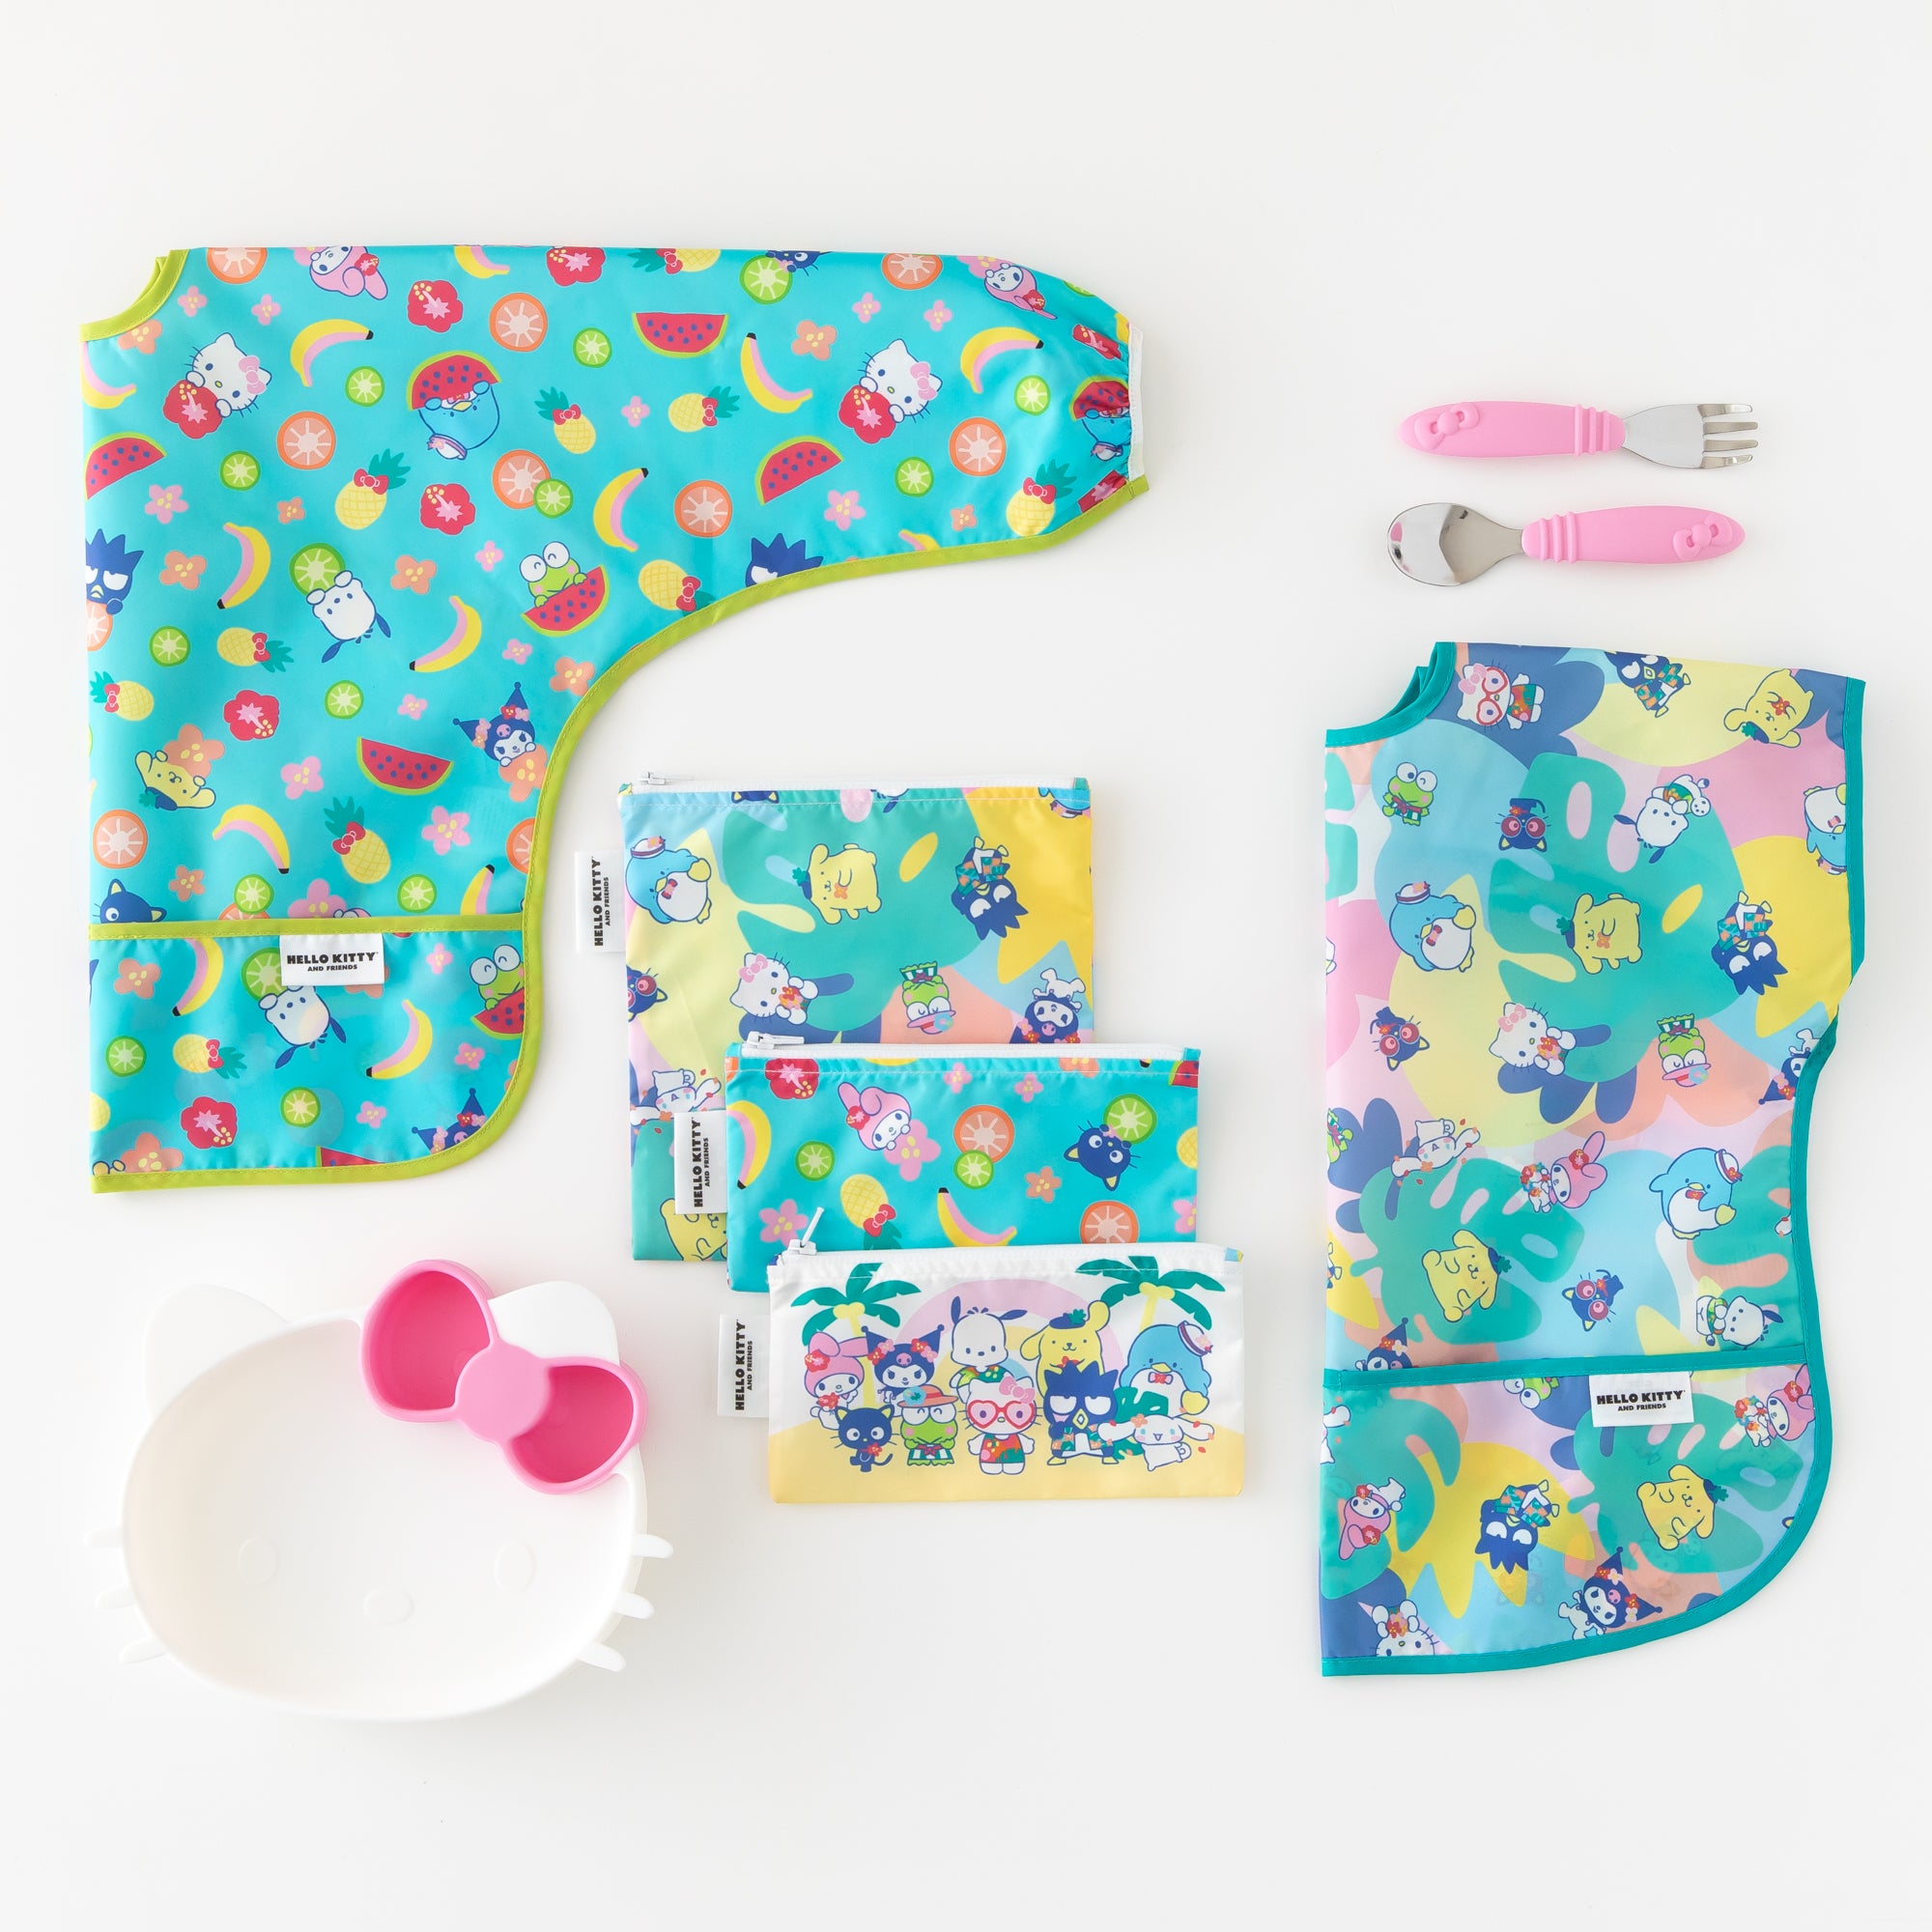 Little Toddlers Gift Bundle, Hello Kitty and Friends Tropical Party